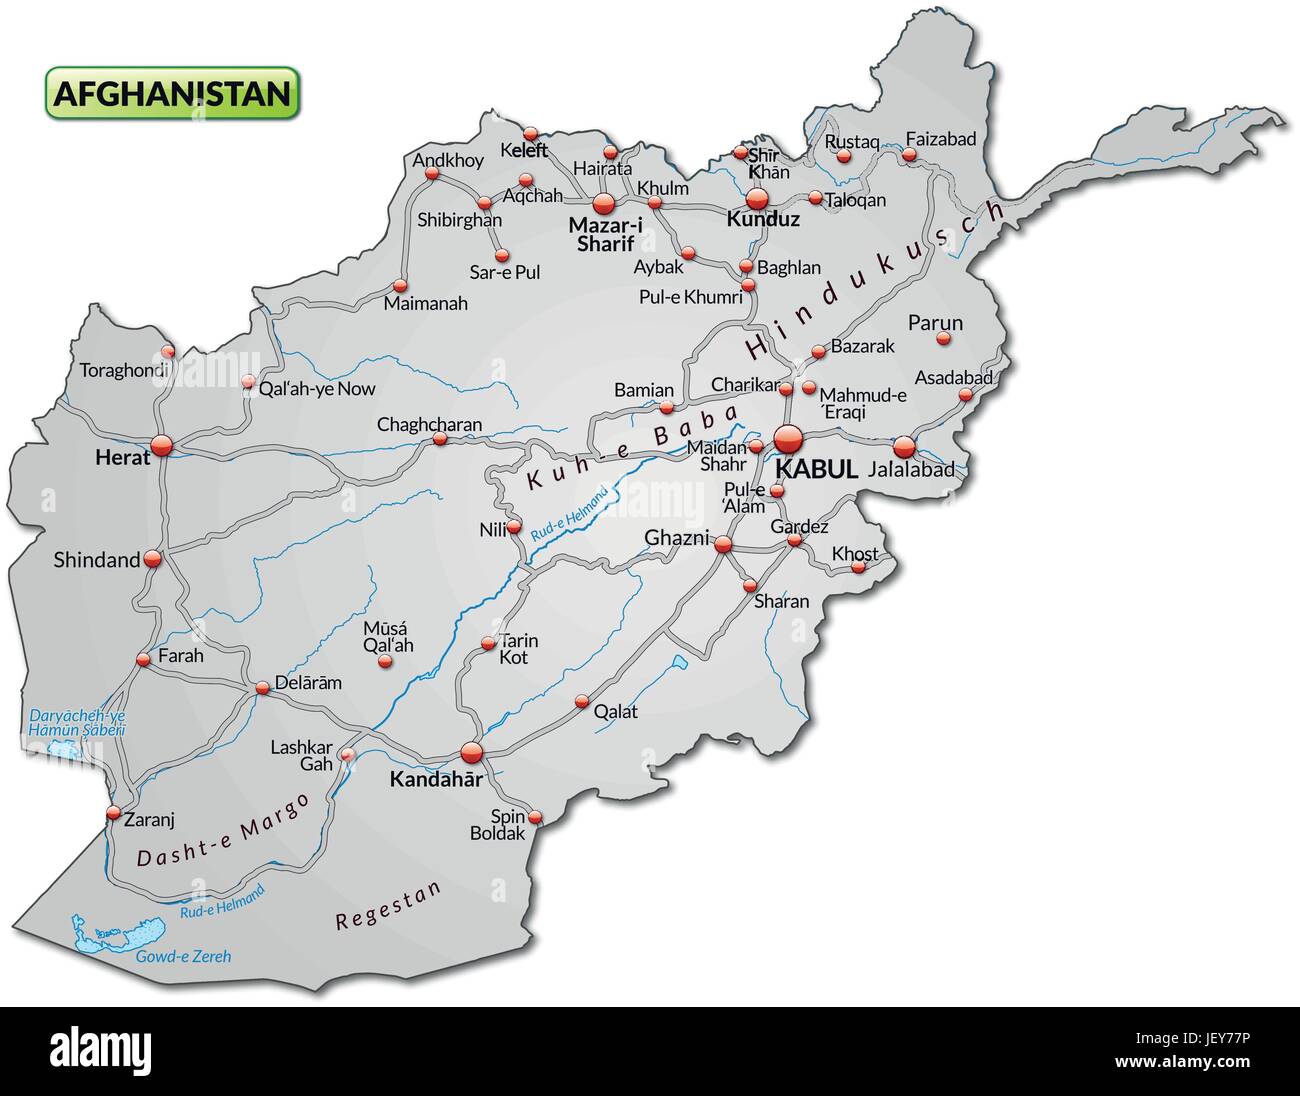 Construction work on Qaisar-Laman ring road resumes in Badghis - The Kabul  times, Afghanistan Trustable News Agency.